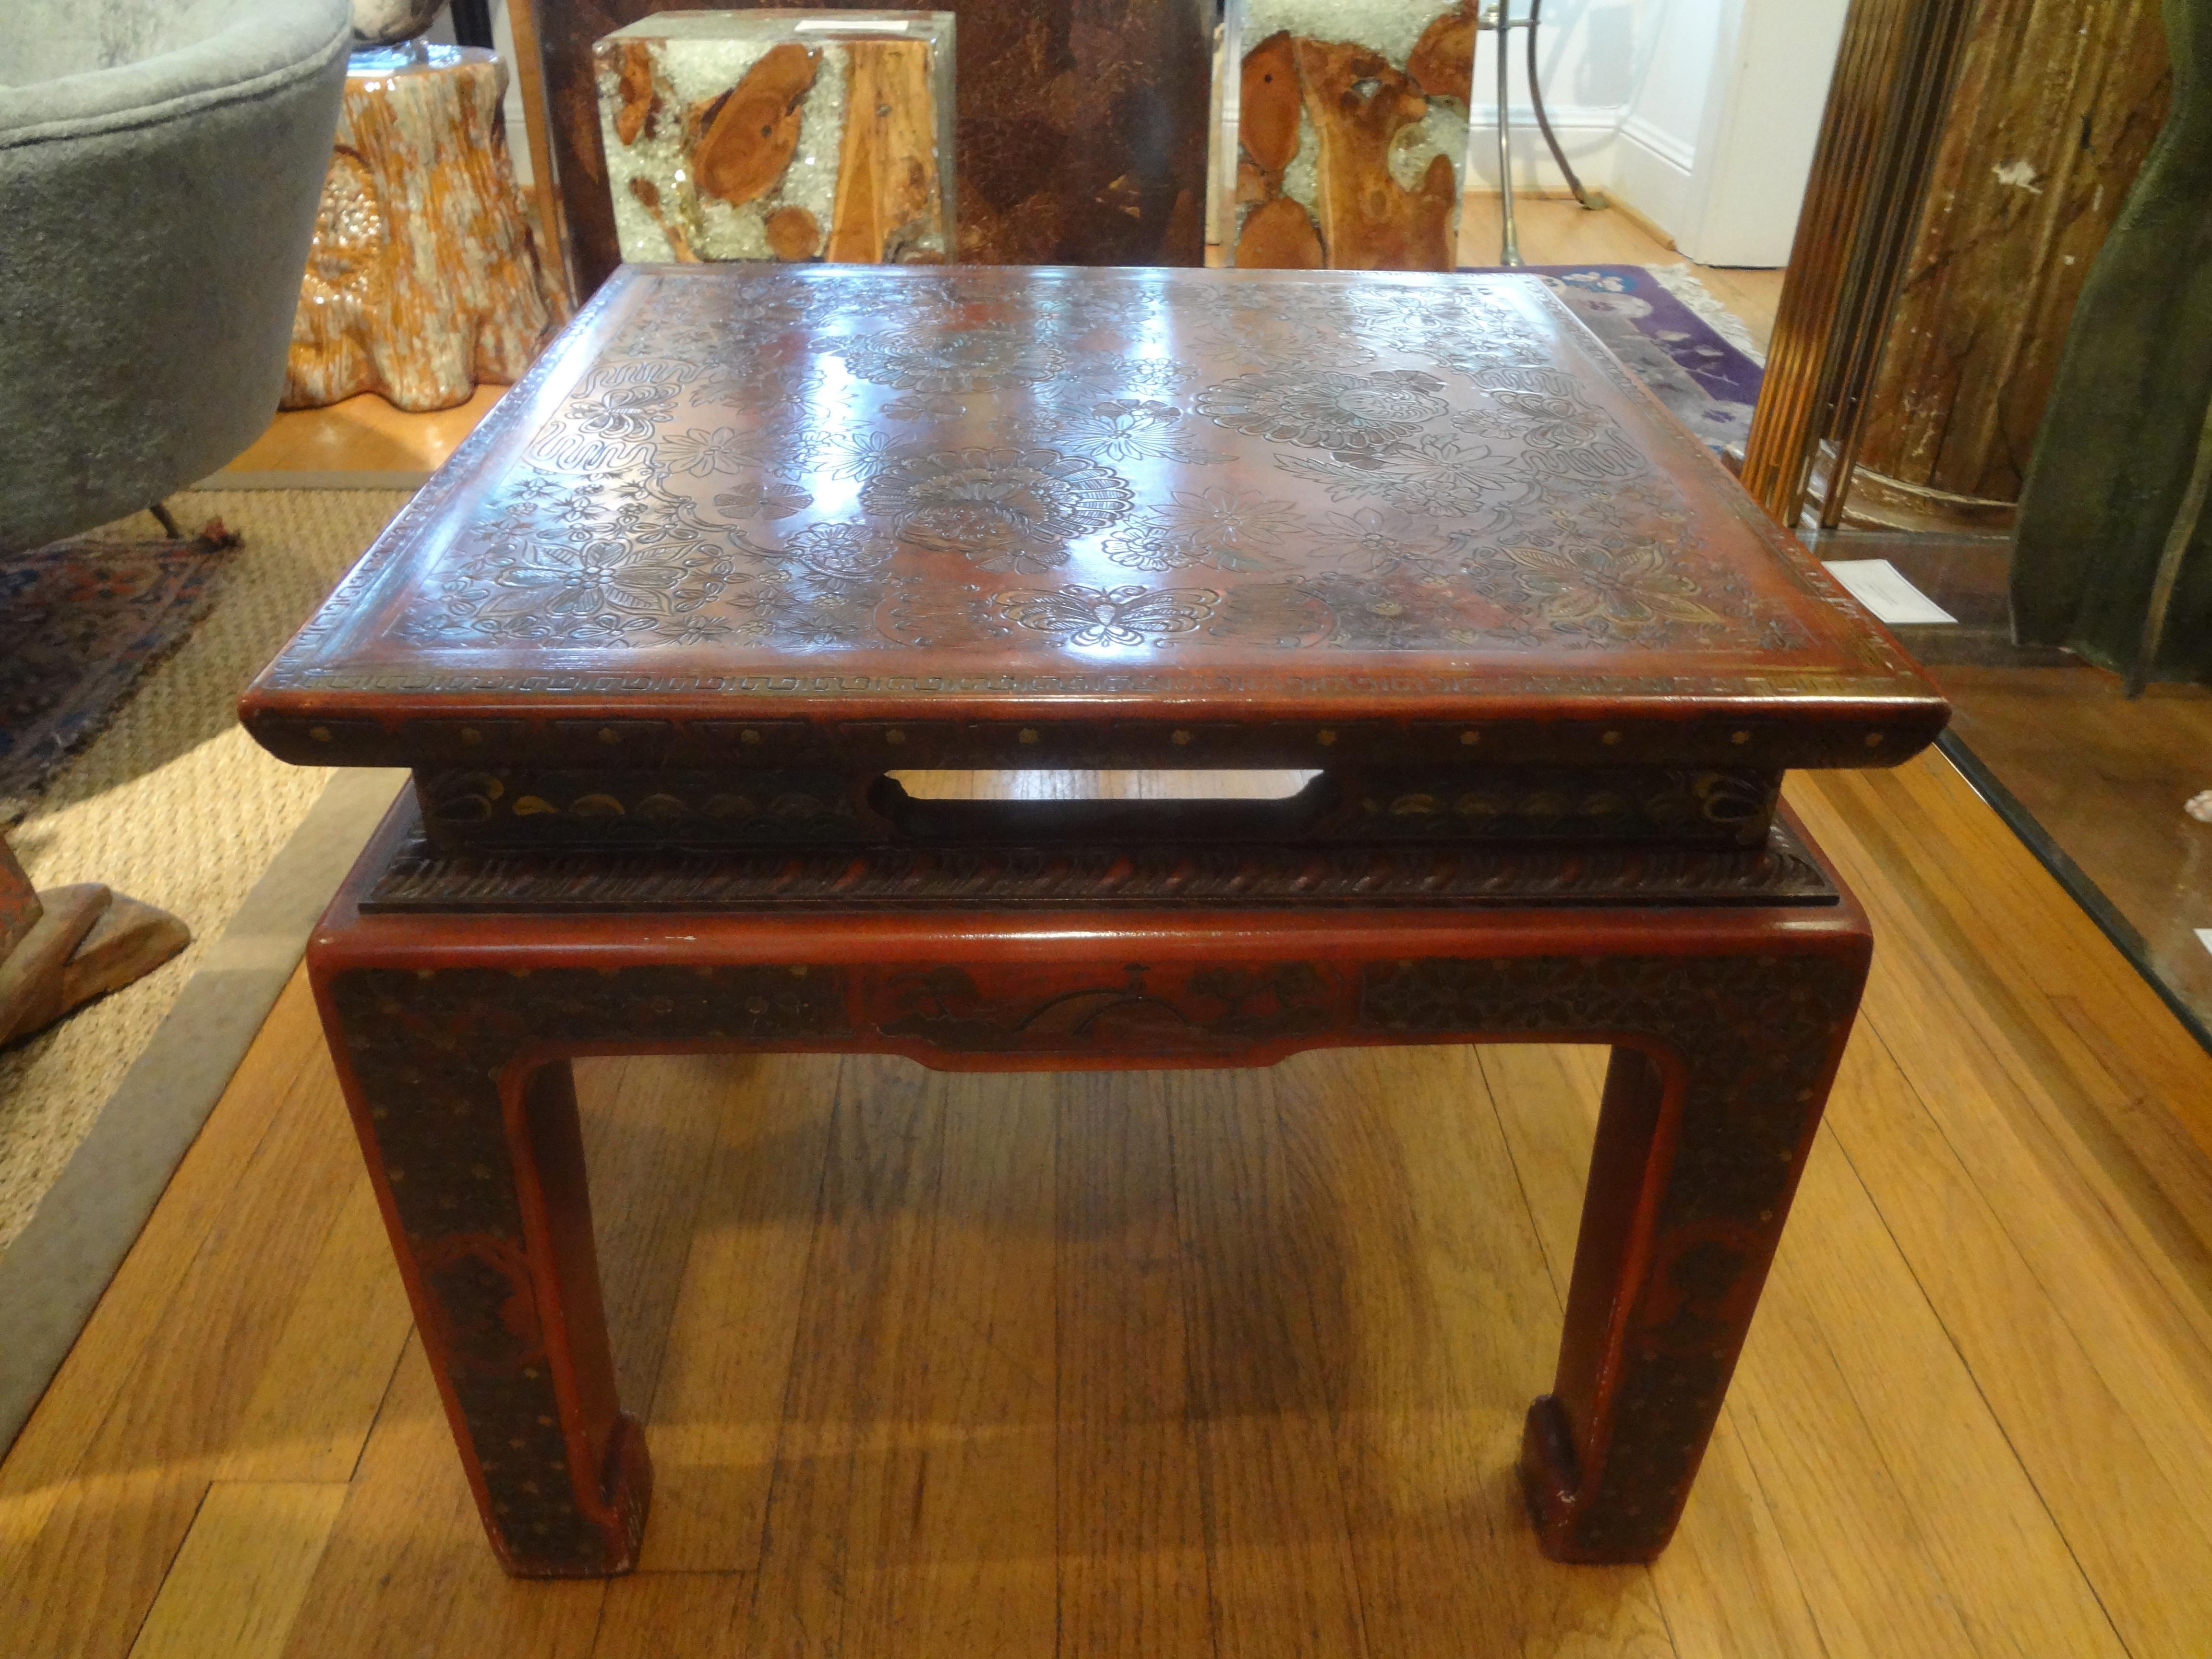 Asian Modern John Widdicomb square lacquered table with incised decoration. This gorgeous low table or end table is lacquered a Chinese burgundy / red with incised floral and butterfly decoration on top and all sides.